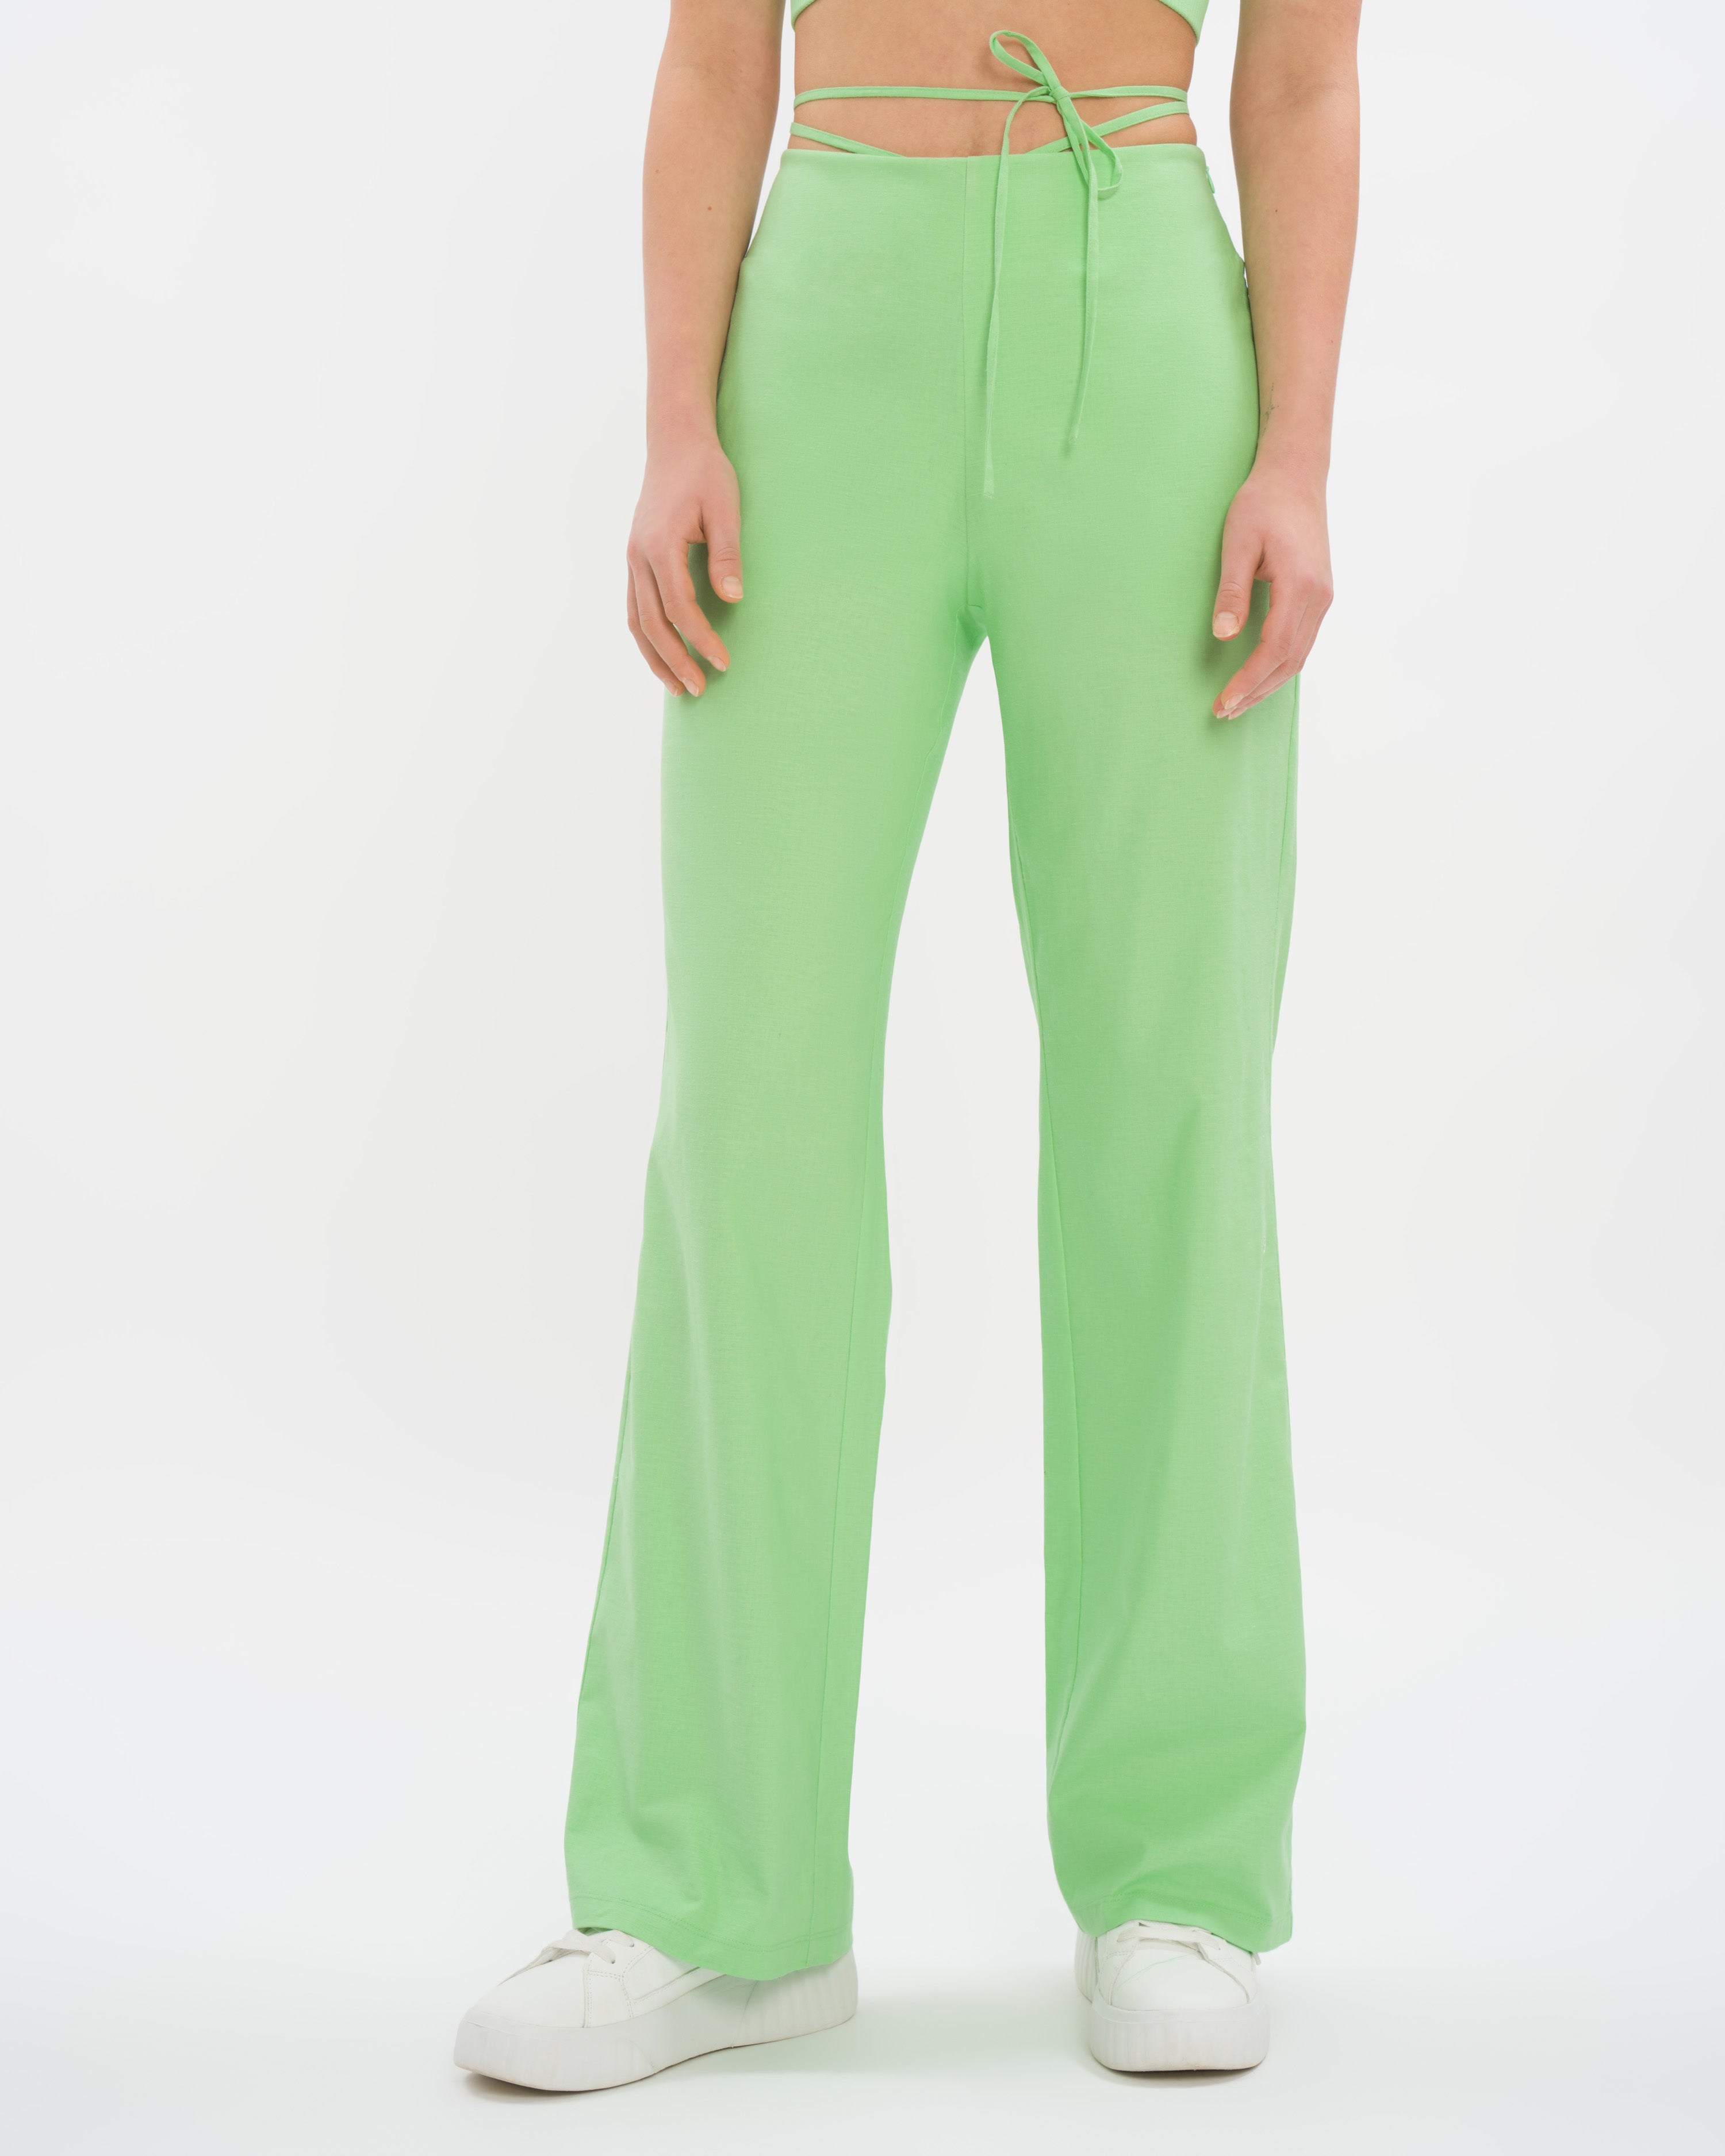 Lily Set Deluxe Tall - Cider Green